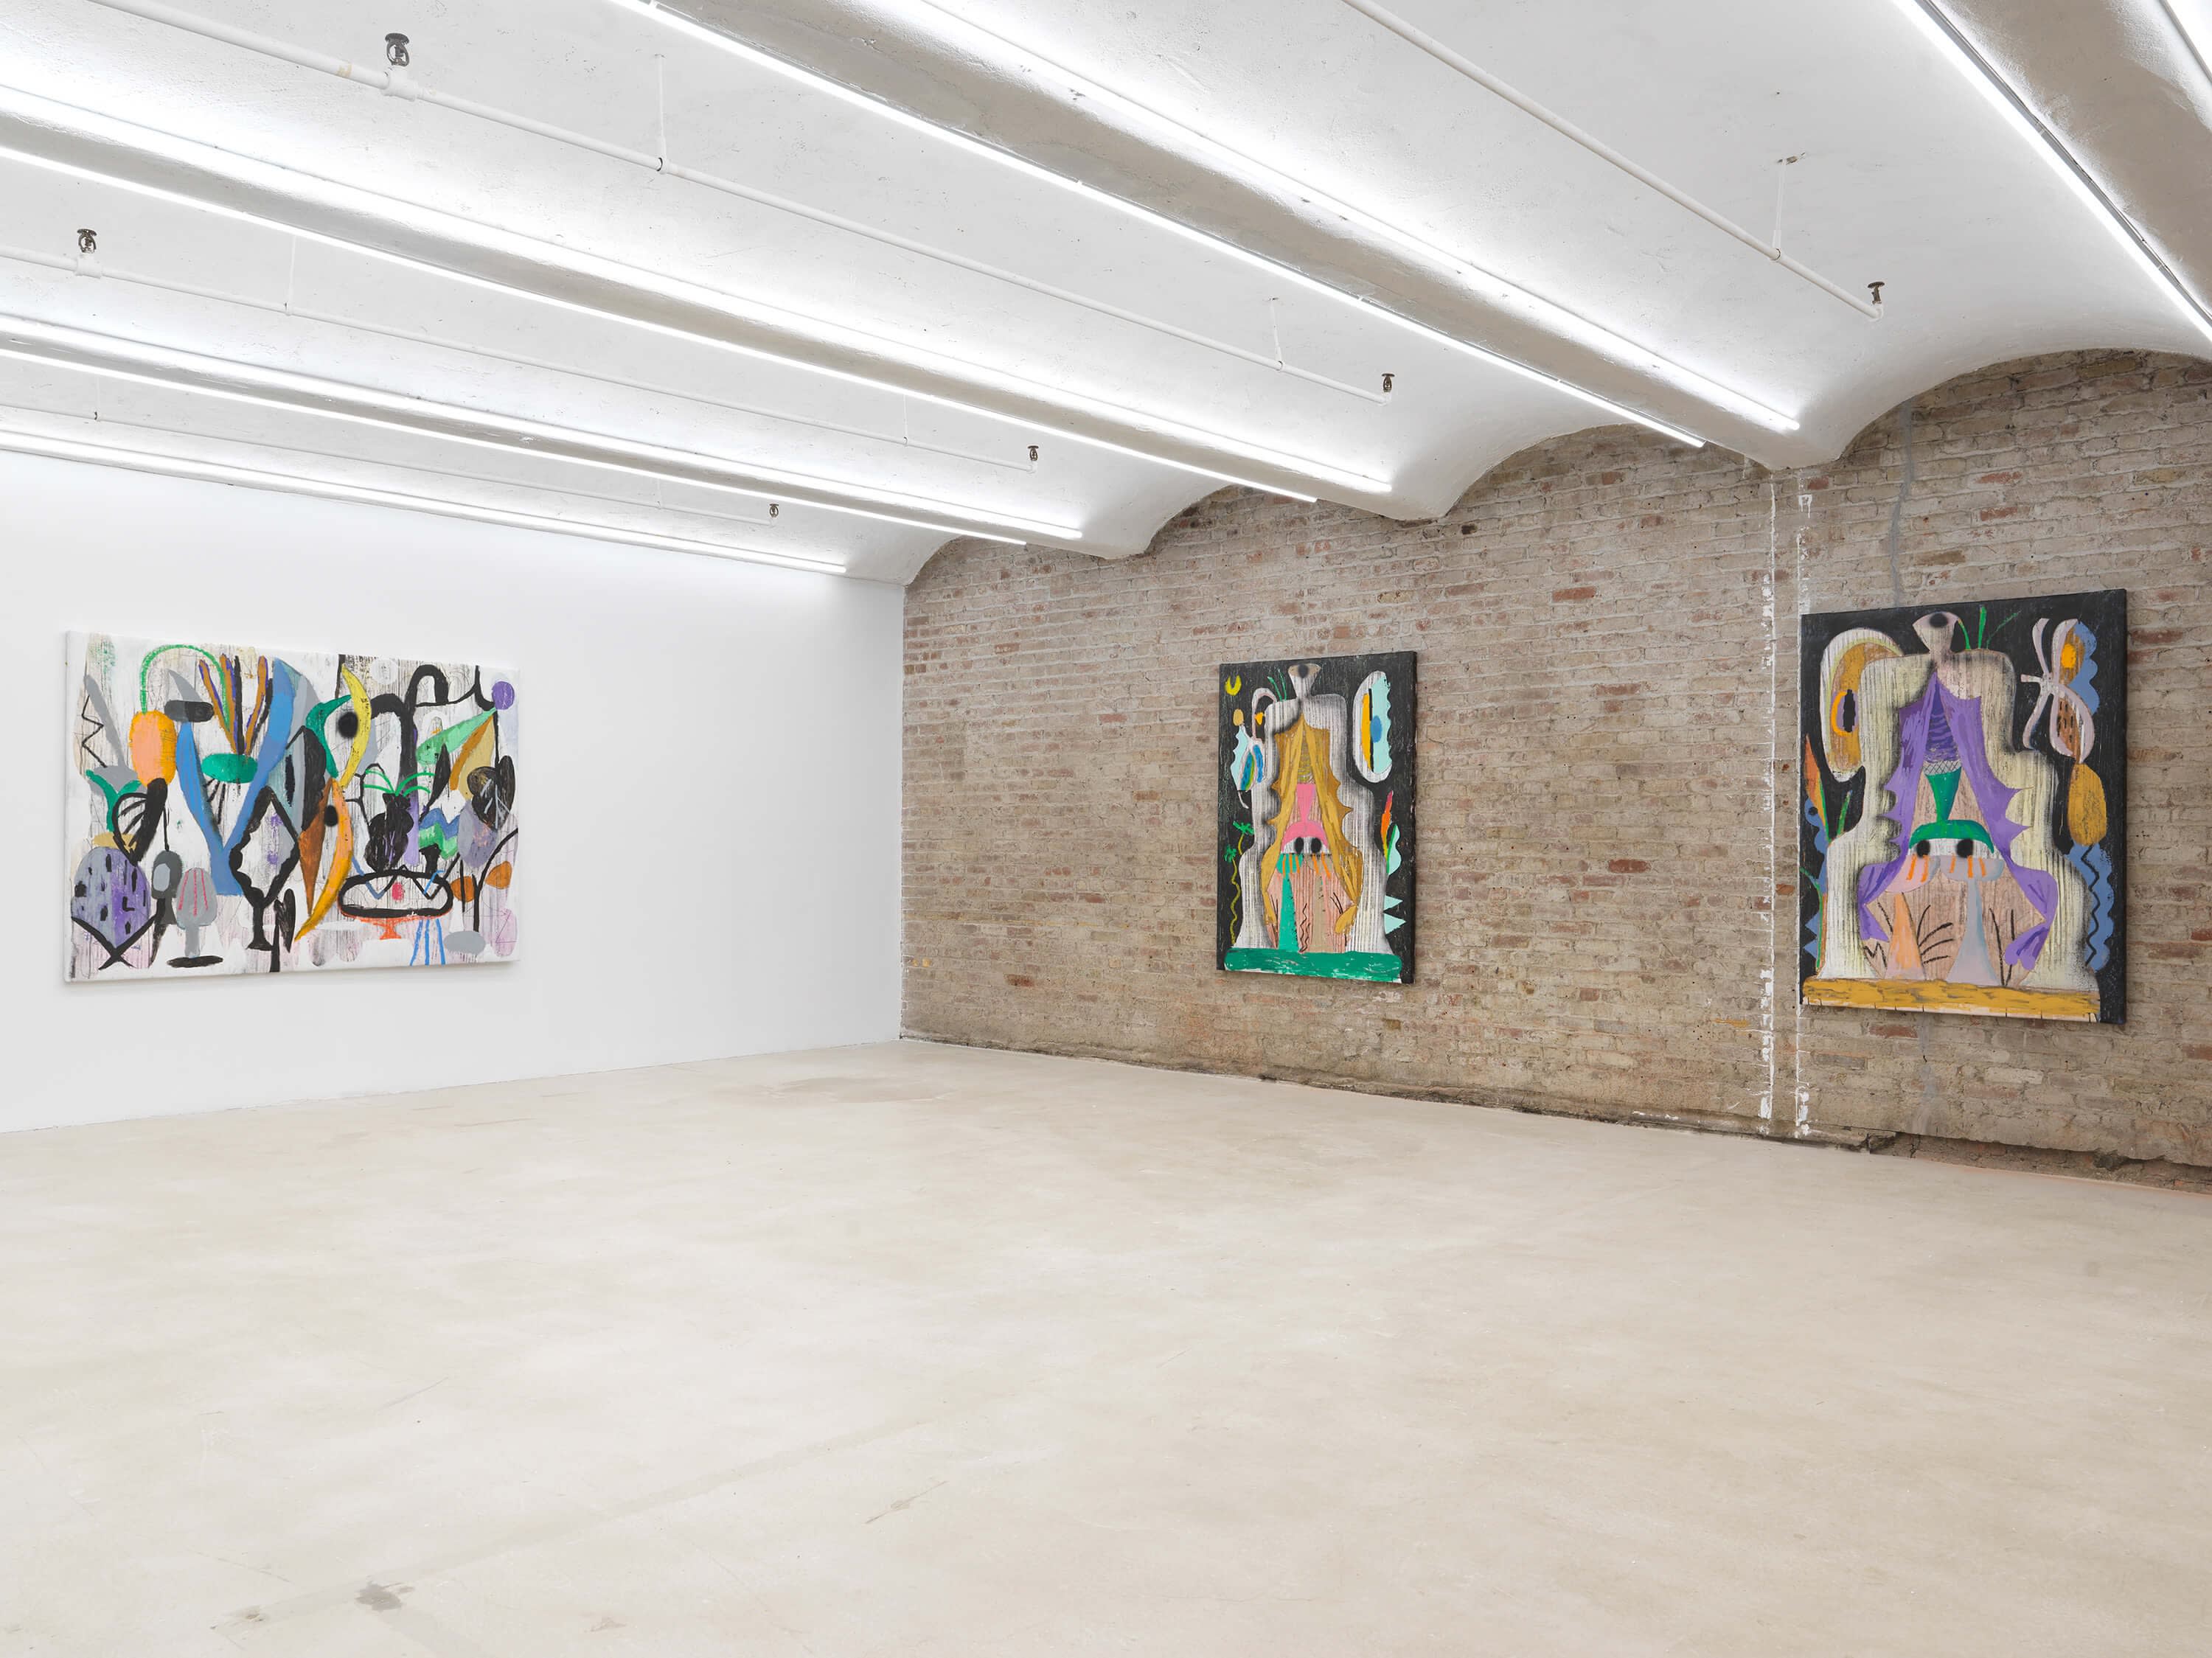 Installation view of three paintings by József Csató on view at the gallery